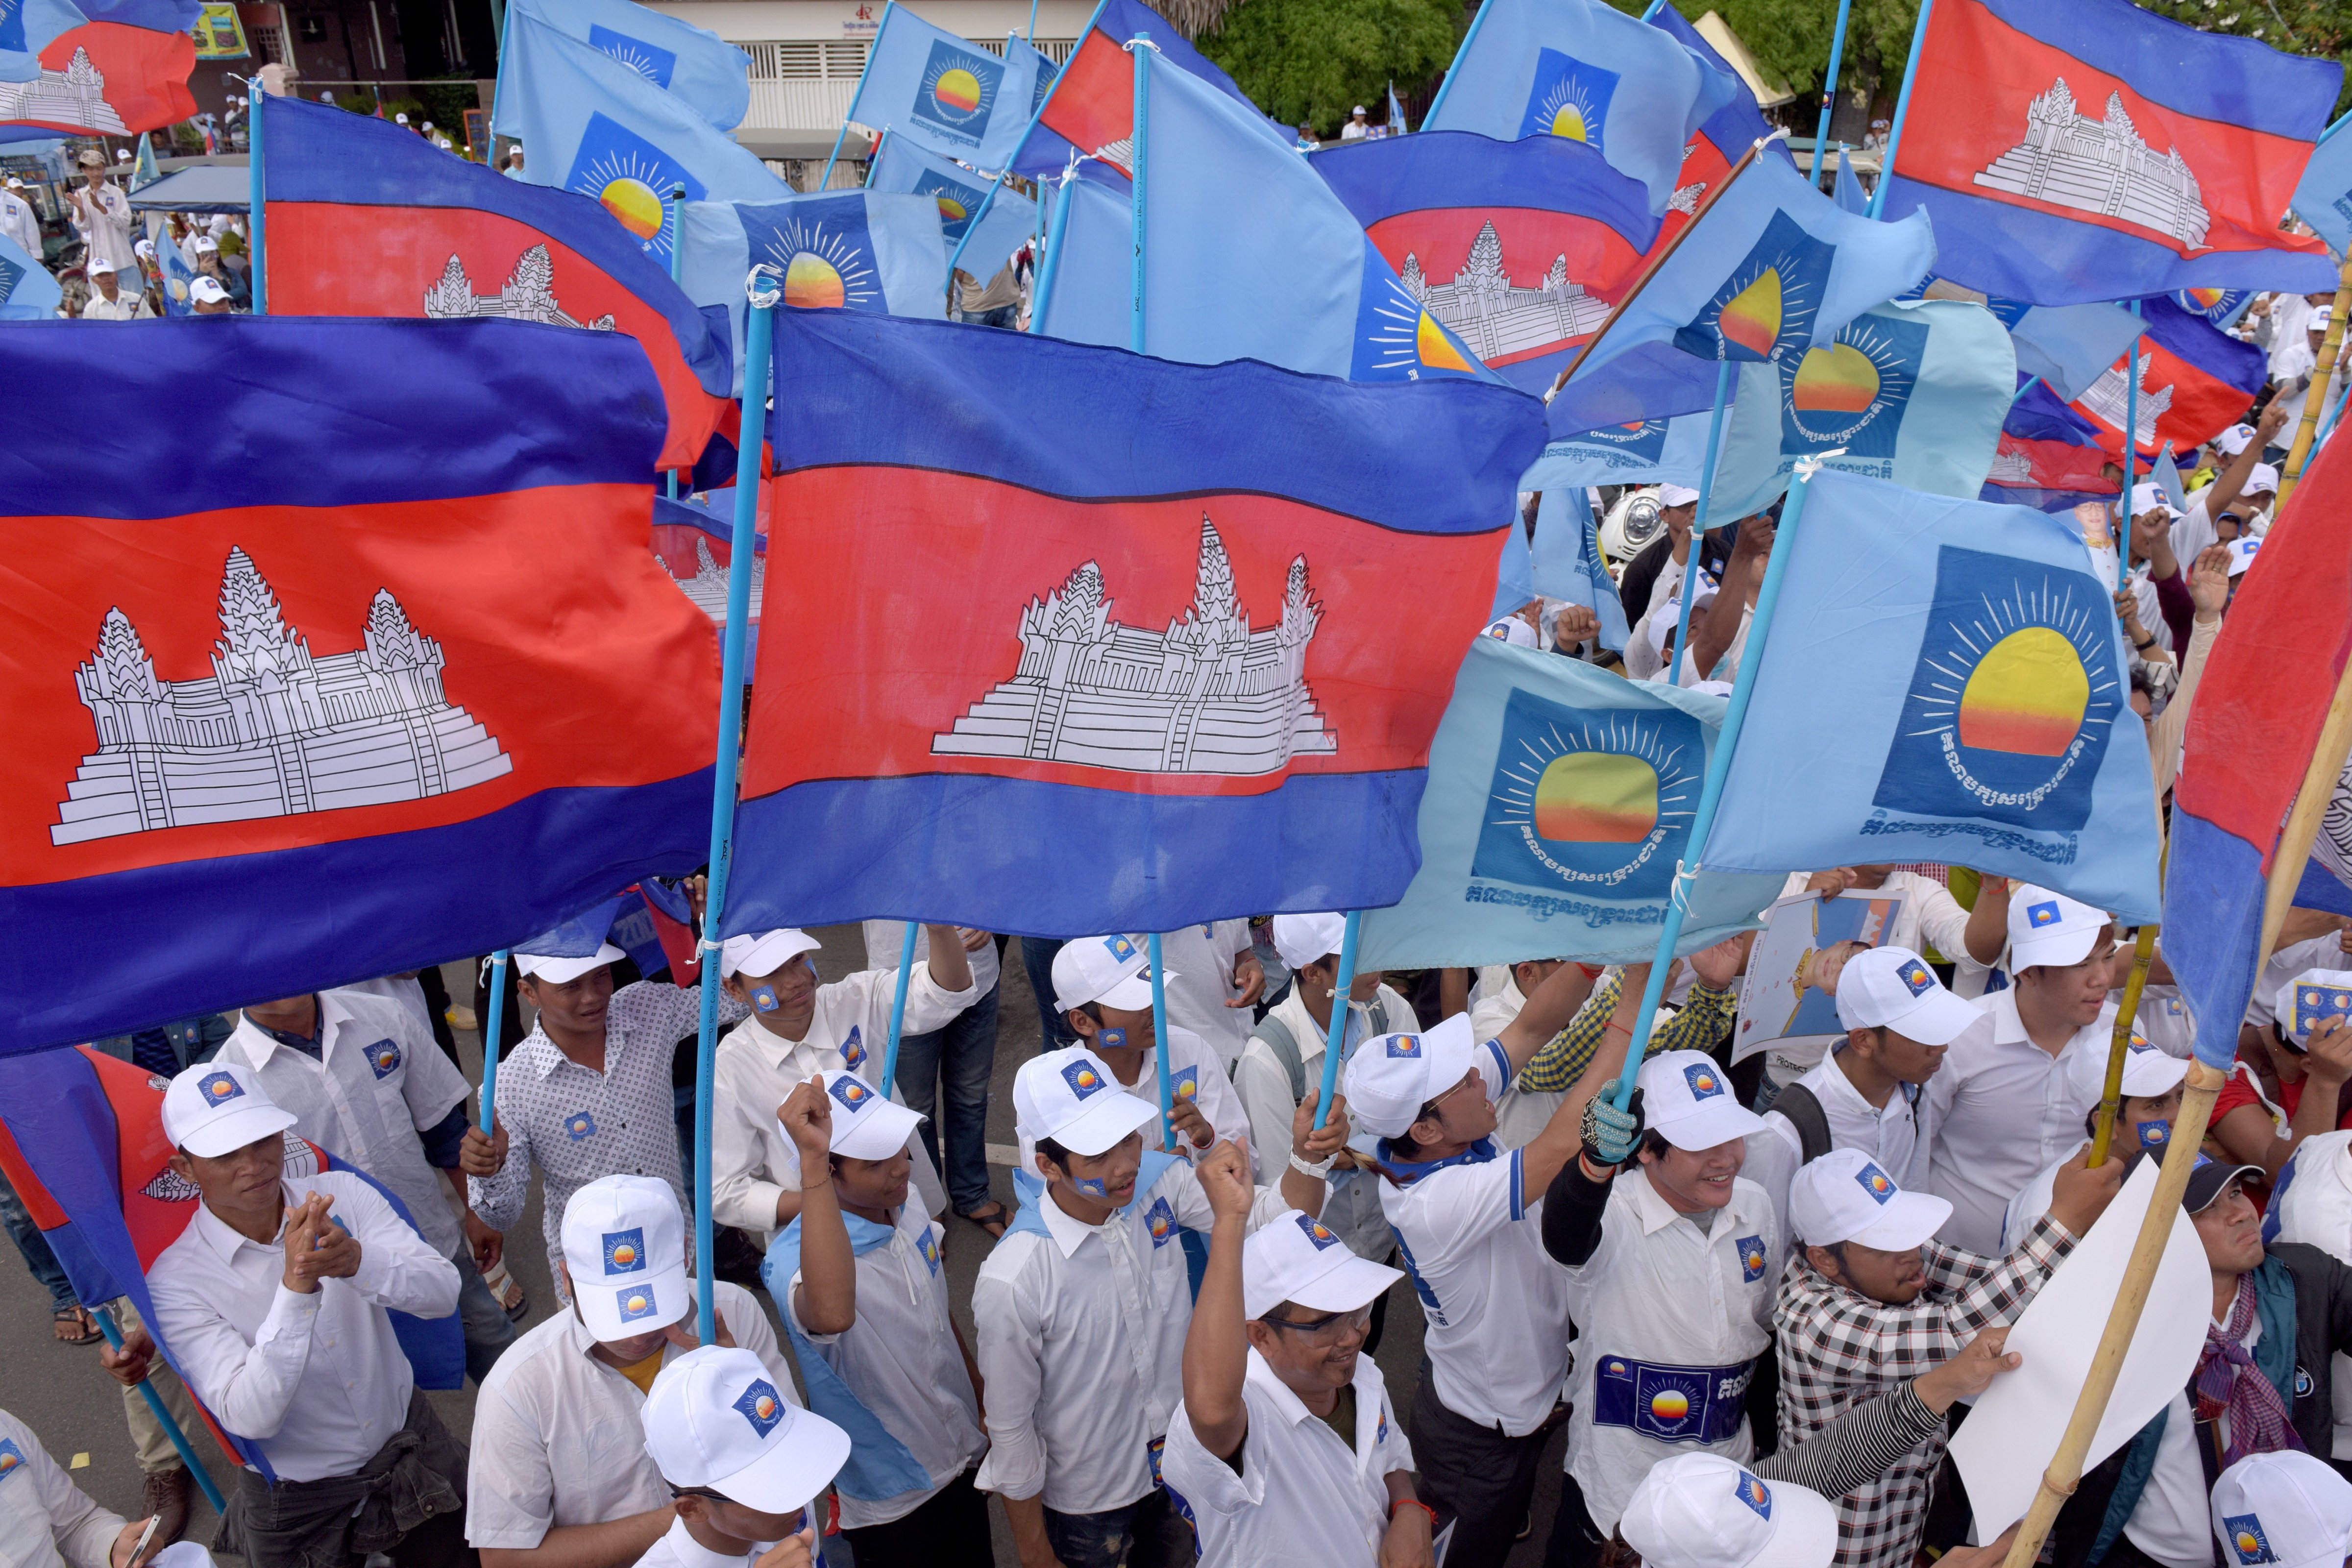 Supporters of Cambodia National Rescue Party rally on the last day of the commune election campaign in Phnom Penh on June 2, 2017. (Tang Chhin Sothy—AFP/Getty Images)